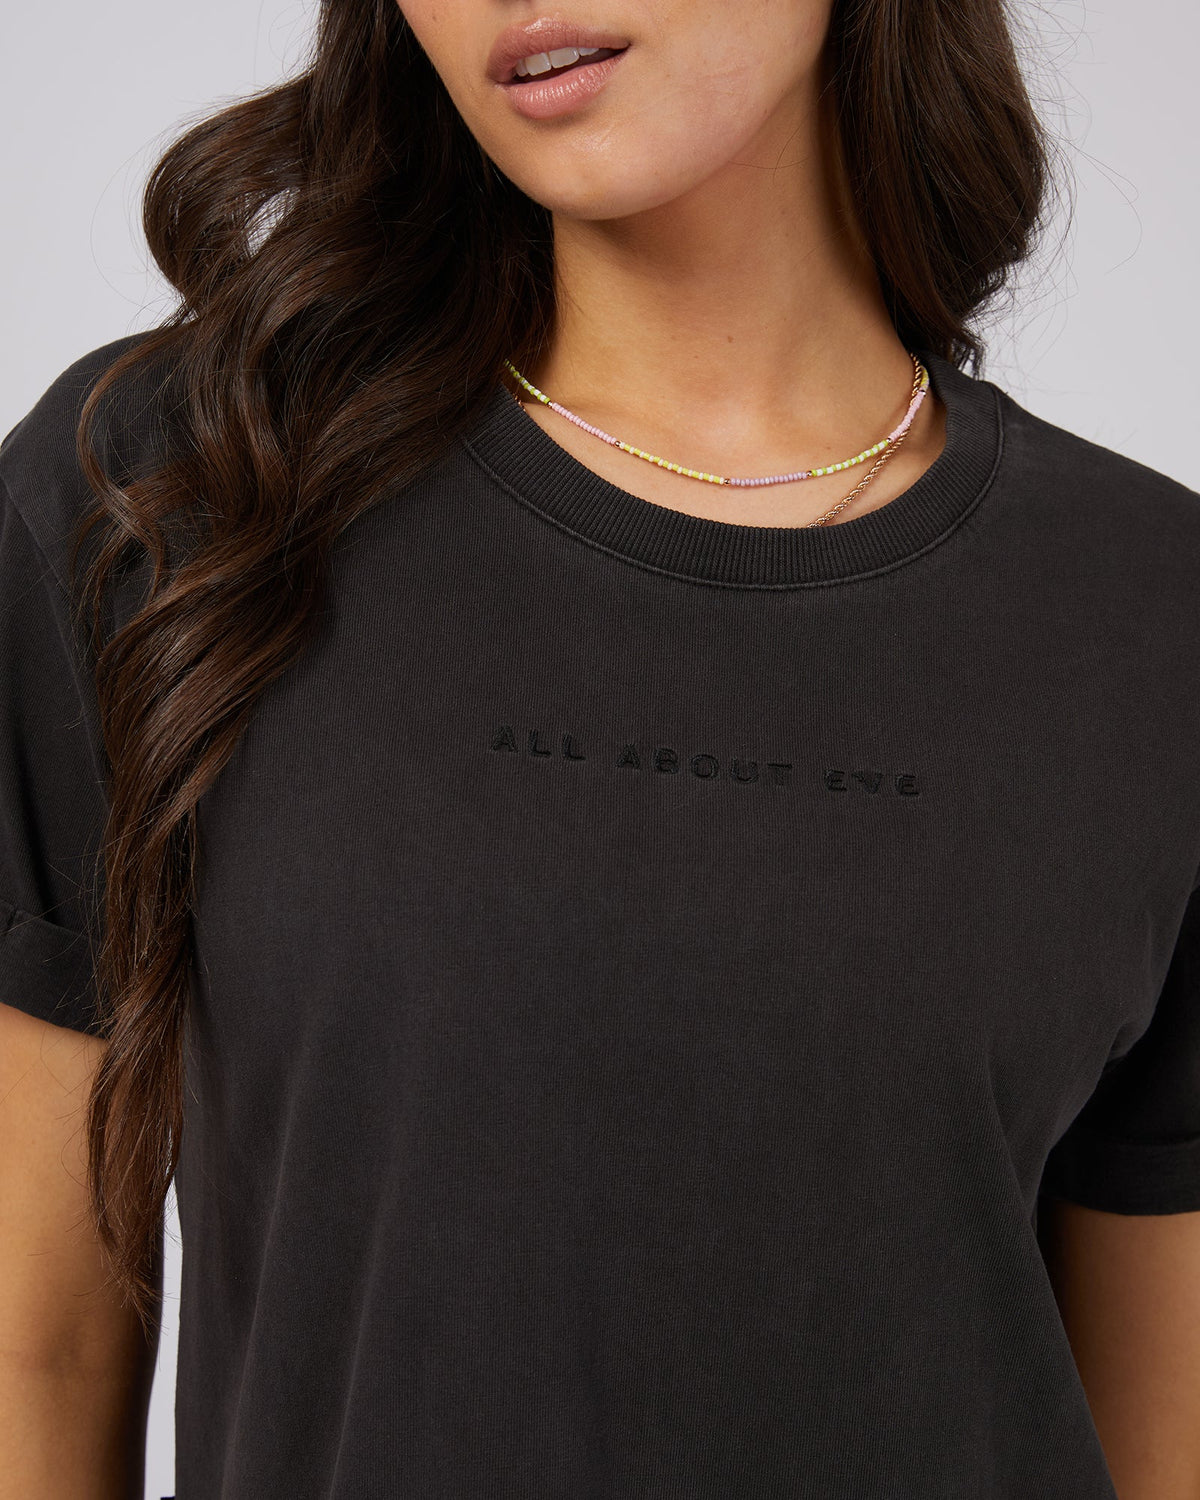 All About Eve-Aae Washed Tee Washed Black-Edge Clothing